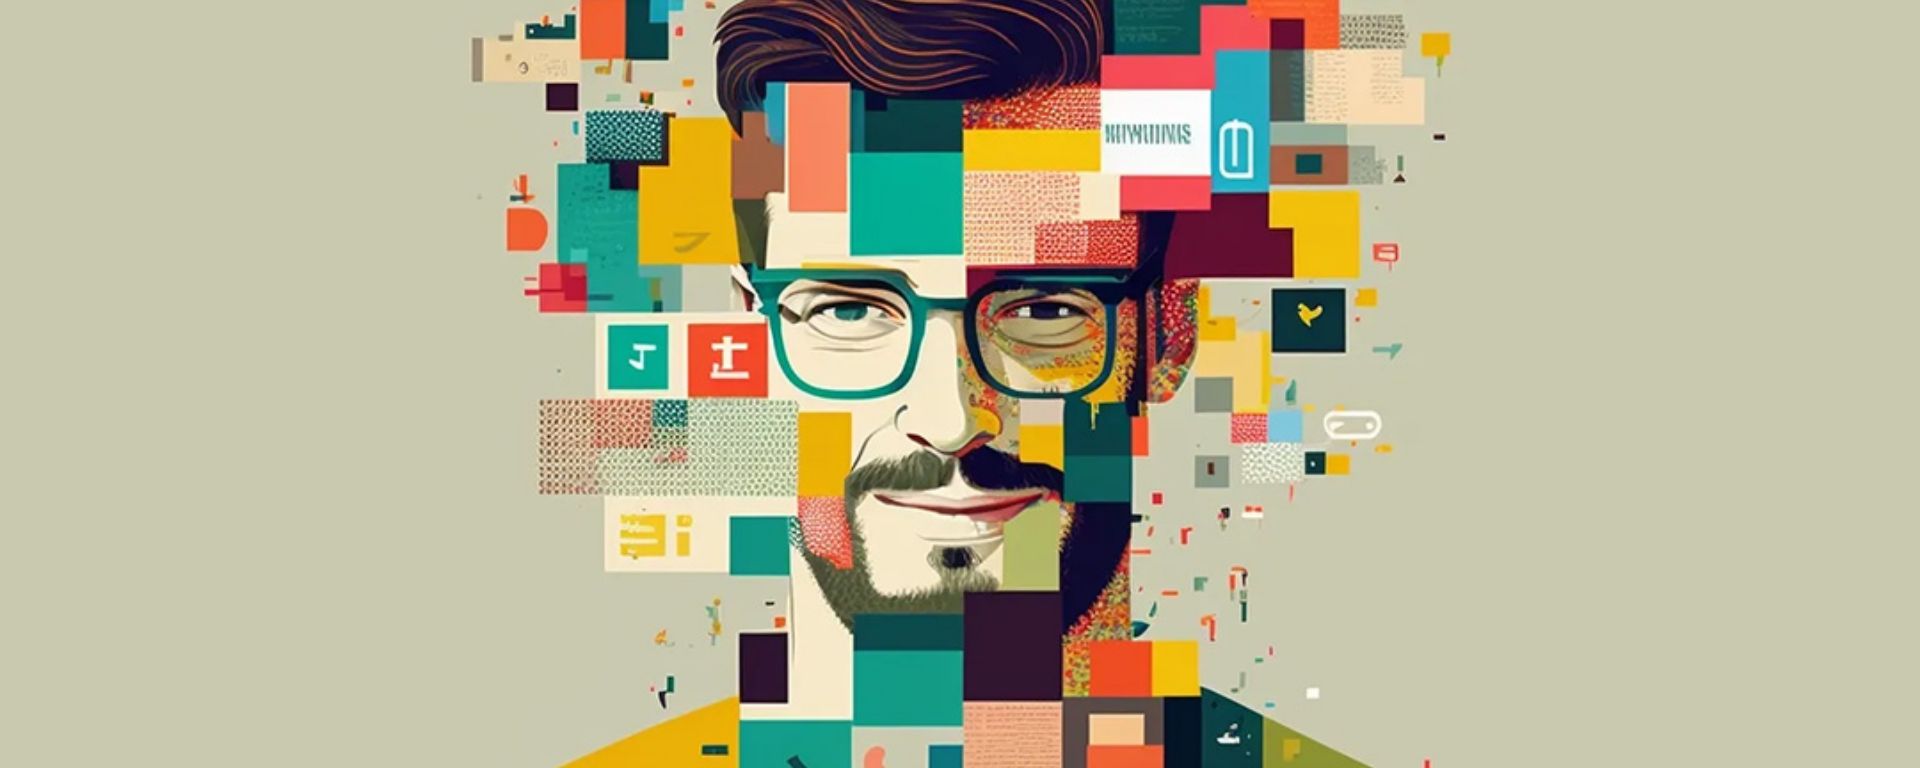 Digital artwork of a man's face composed of various colorful abstract and geometric shapes, symbolizing a complex and multifaceted personality. Elements of modern technology and intangible user experience are interspers